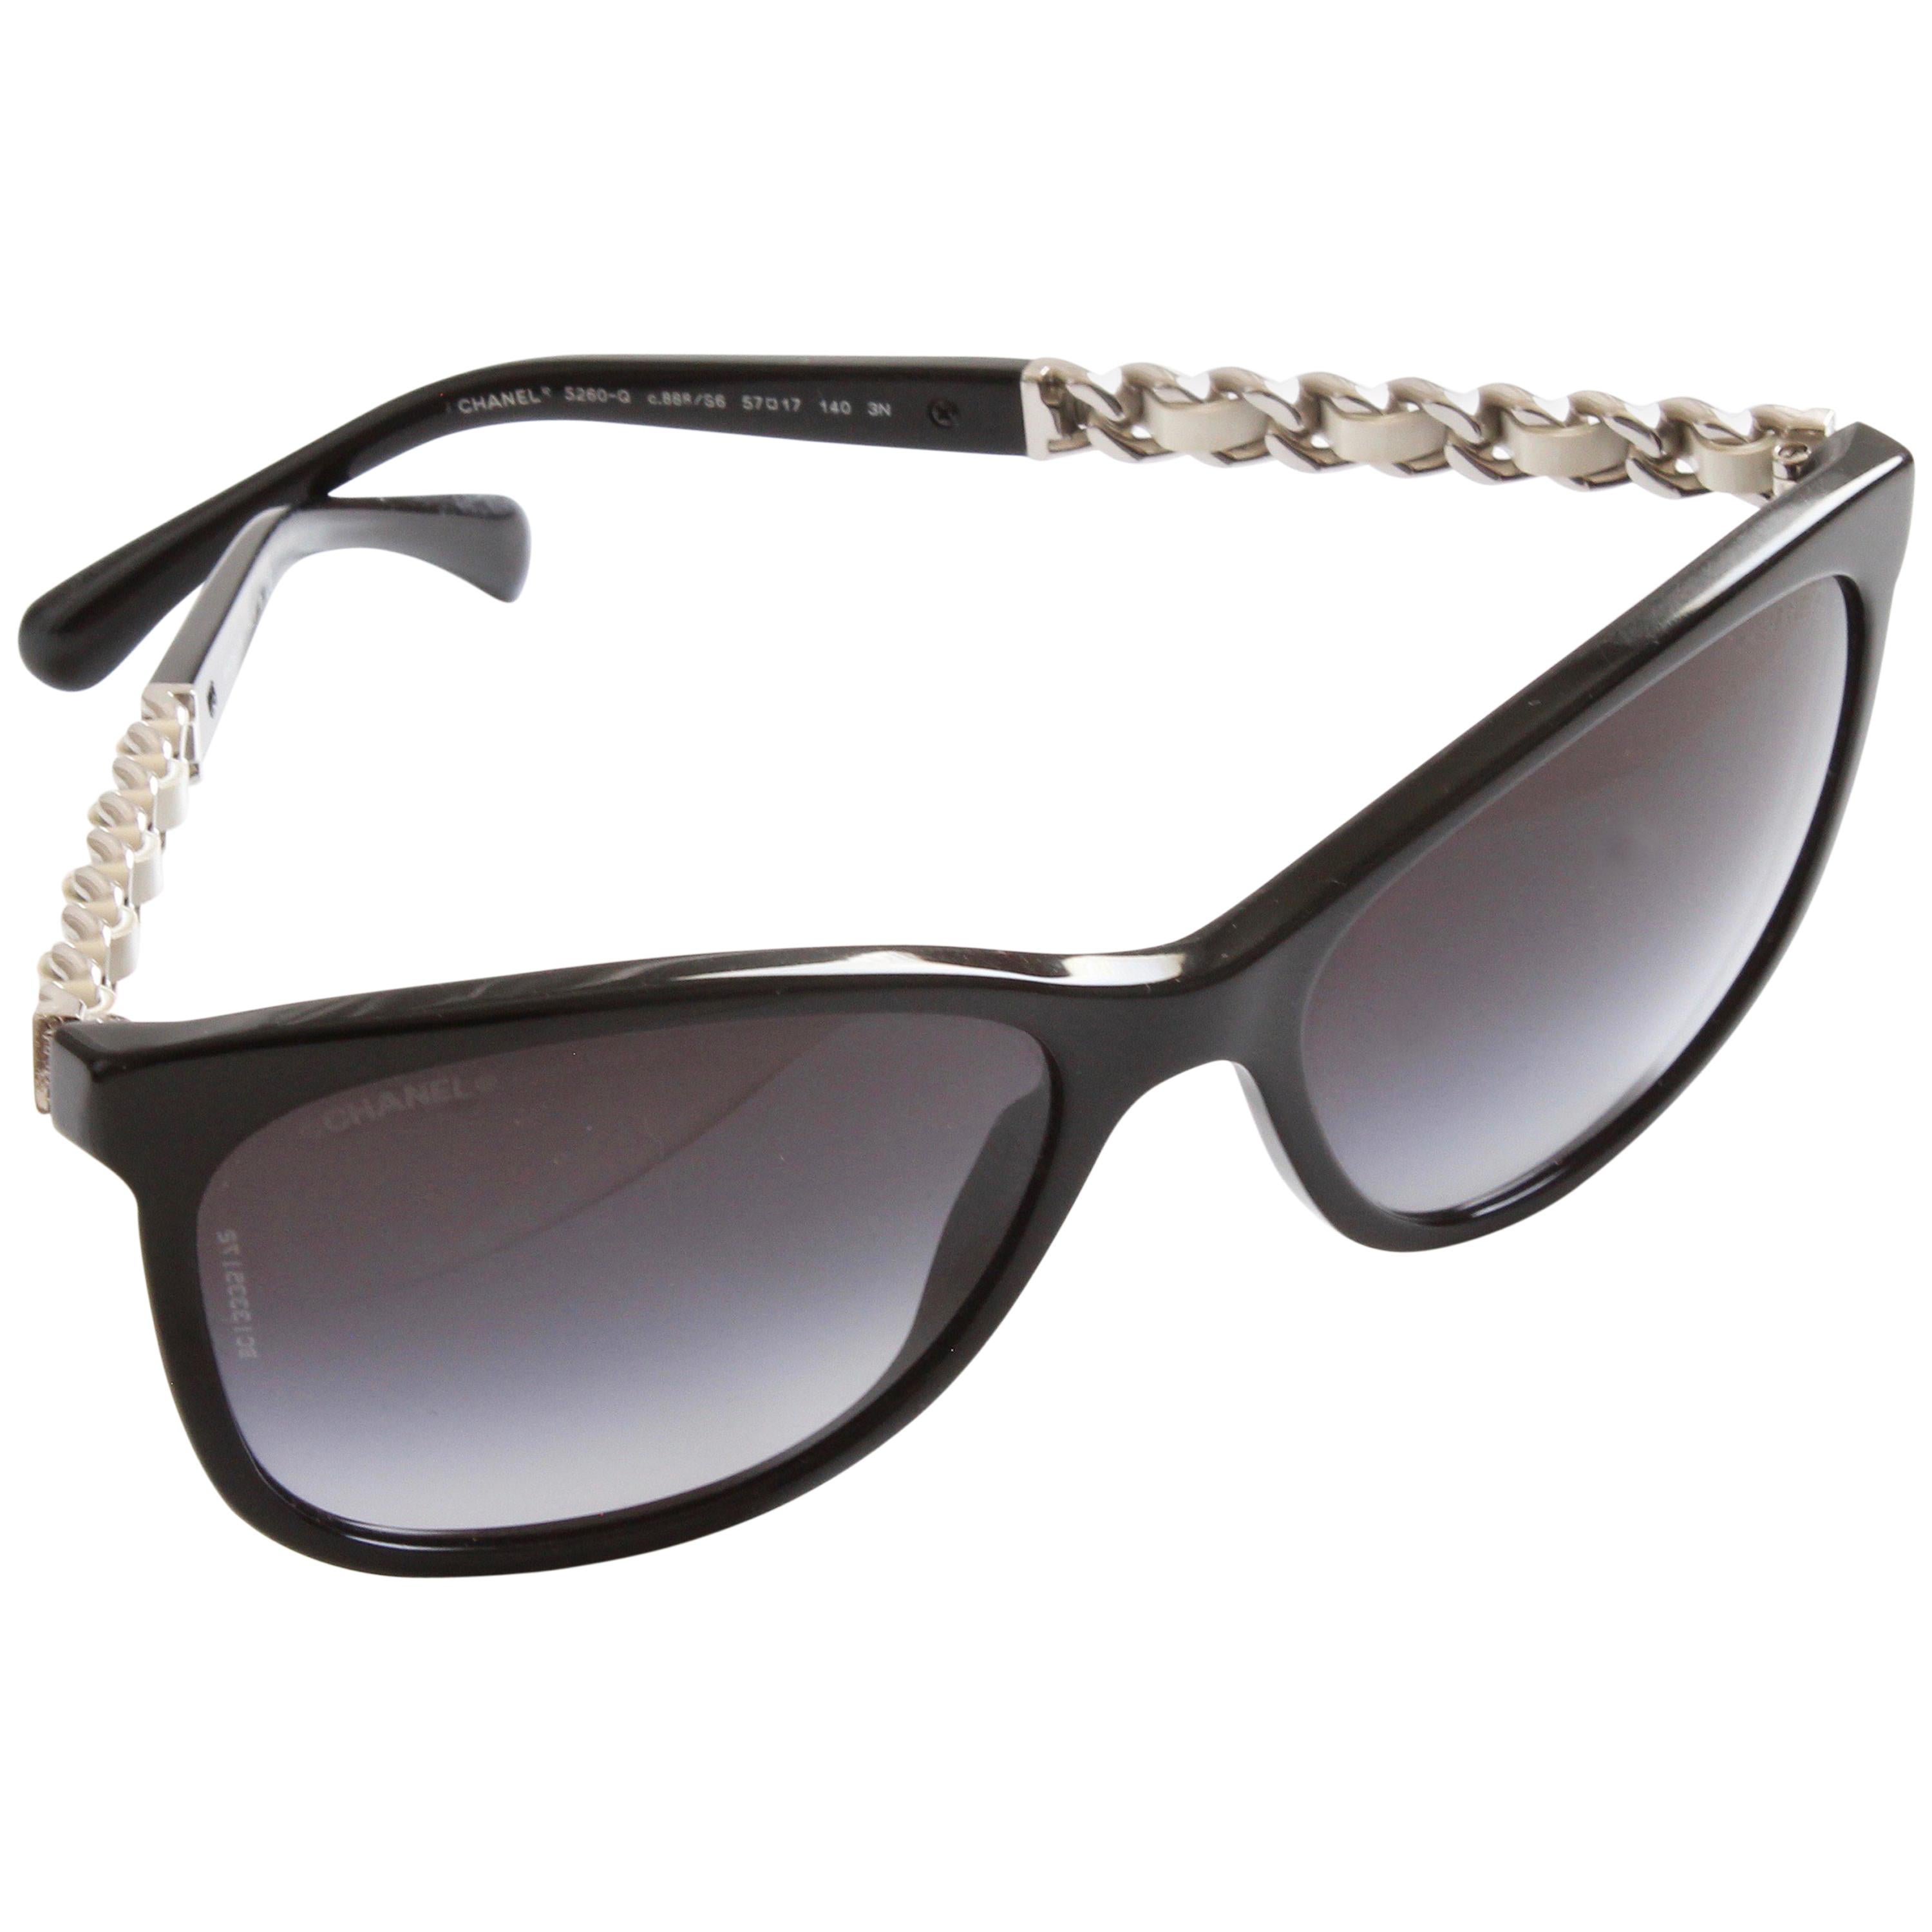 Chanel Cat Eye Silver Chain White Leather Sunglasses with Case, 5260-Q 